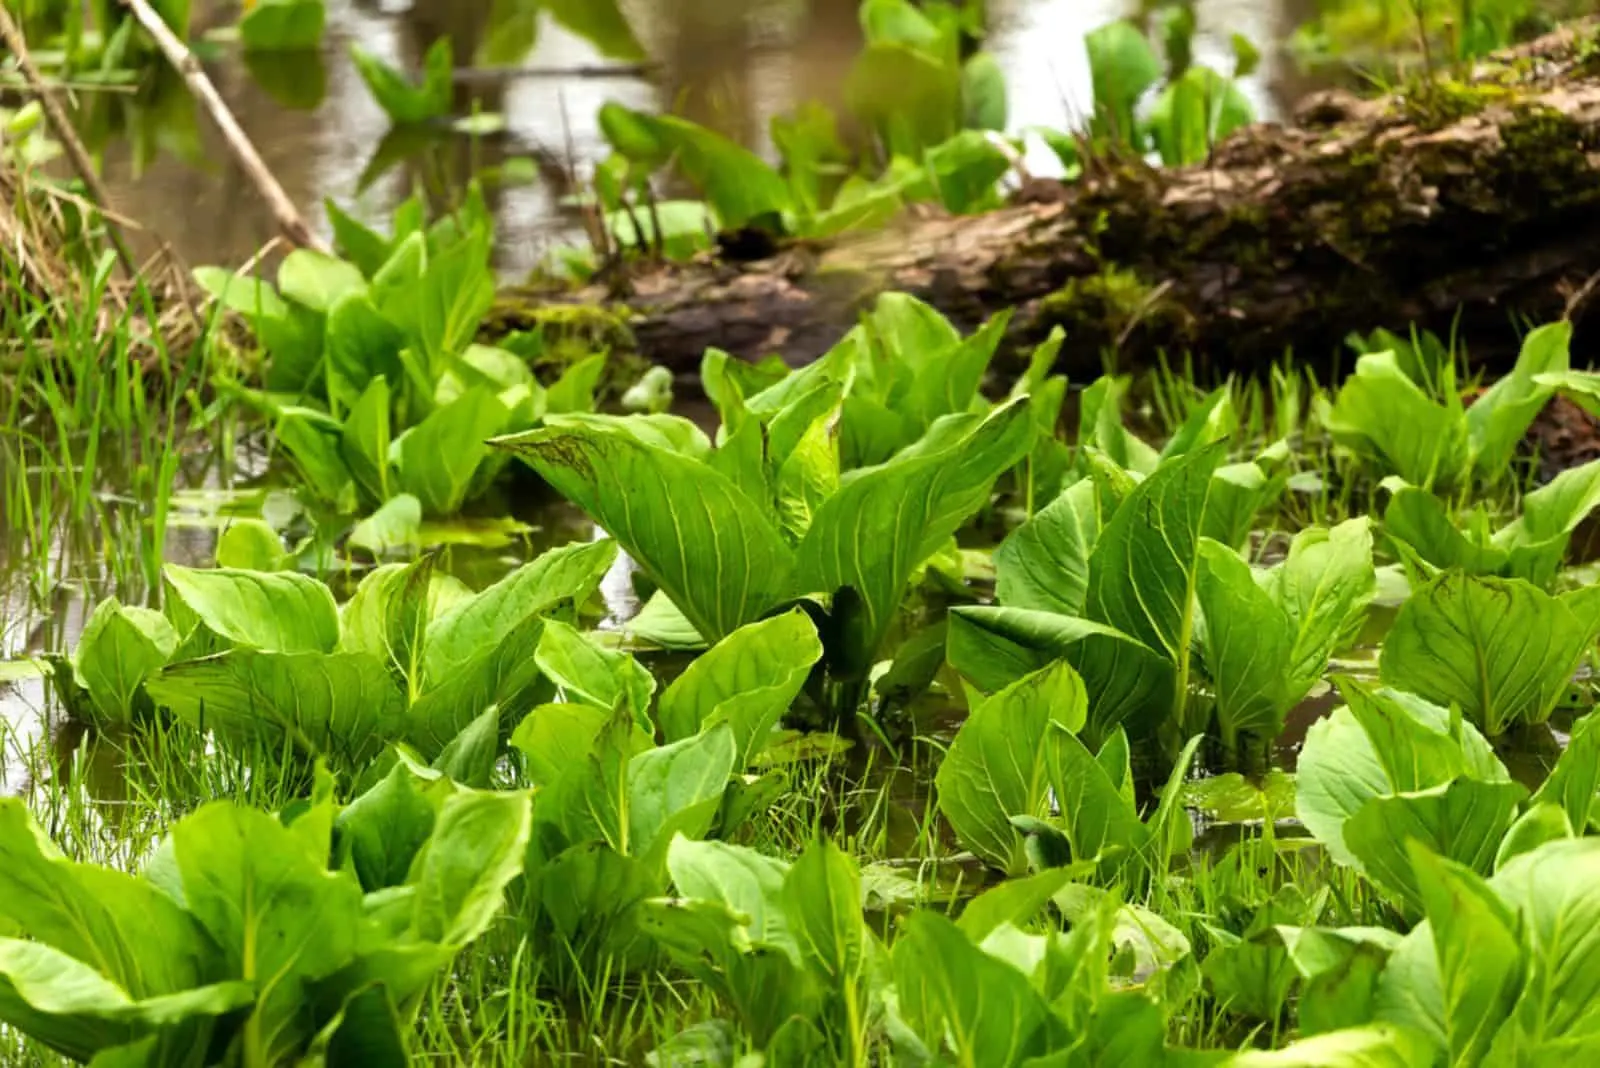 Skunk Cabbage in the wood